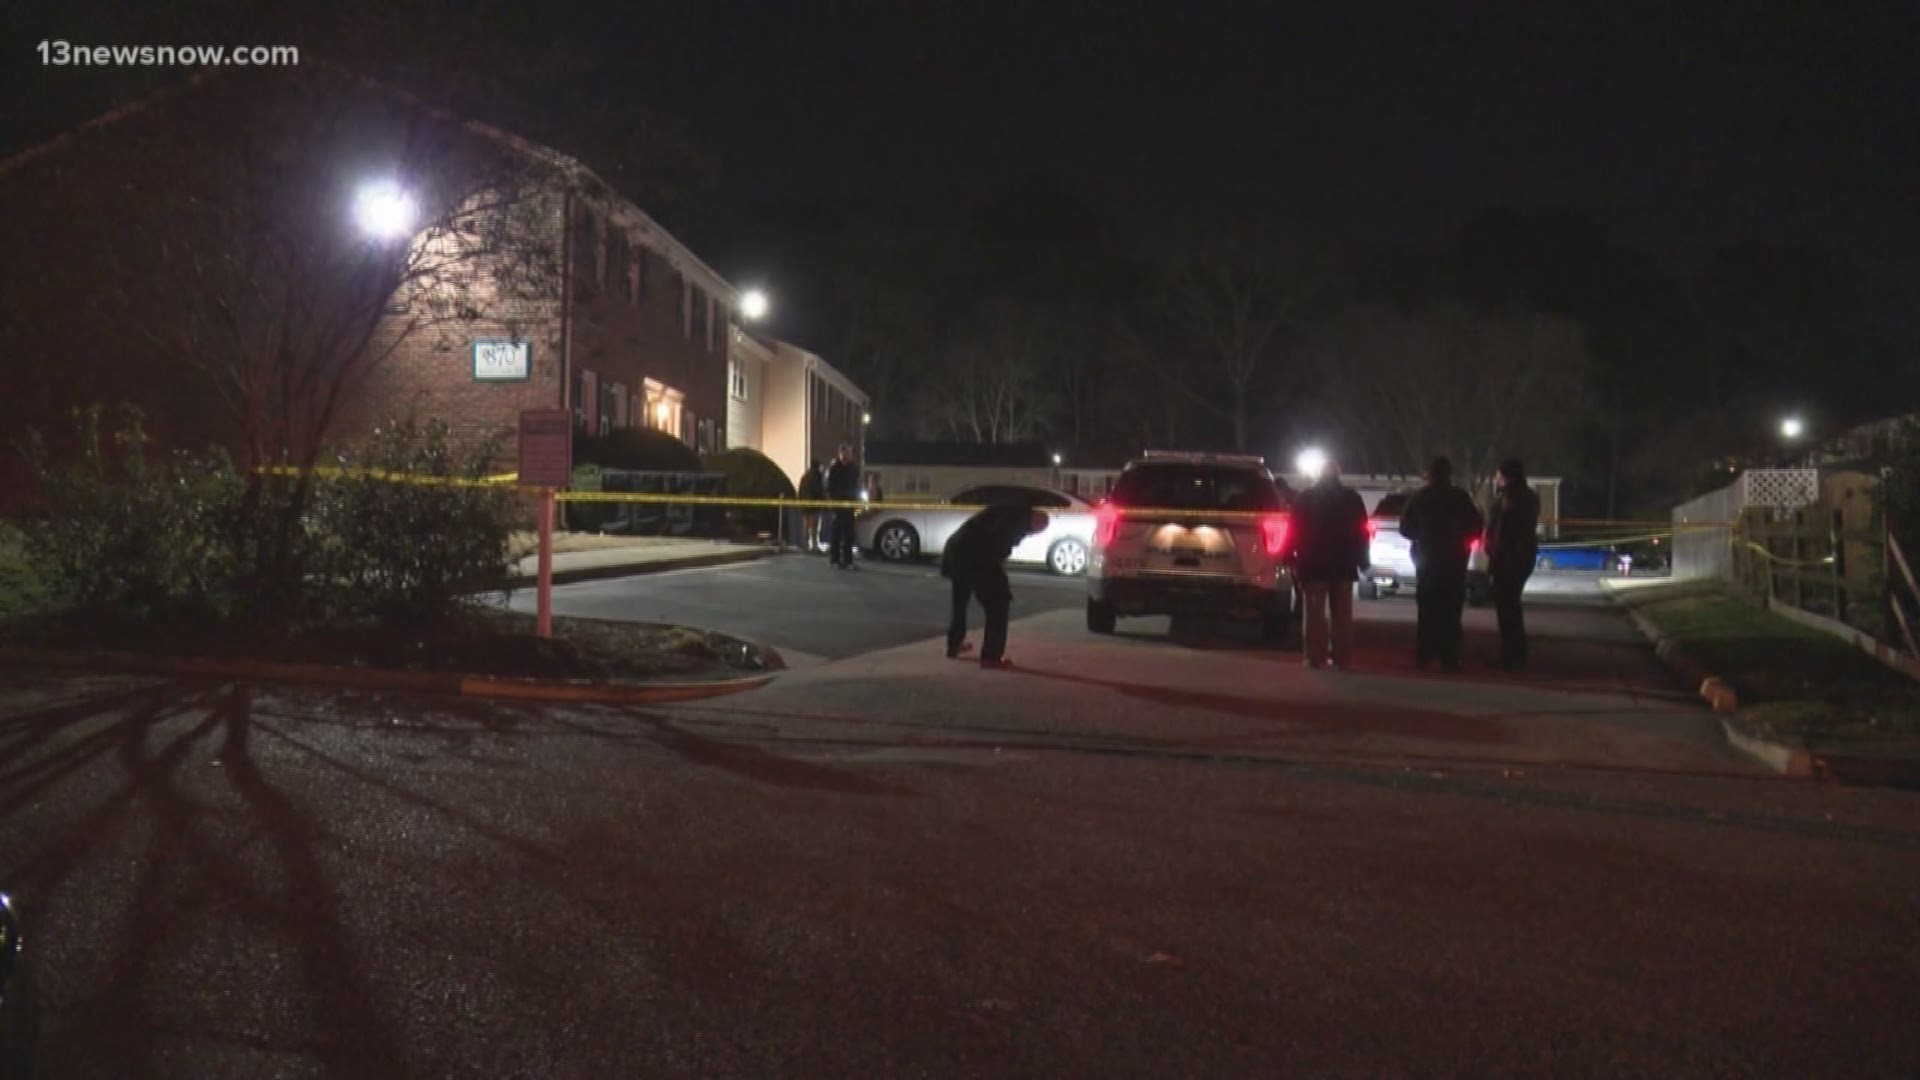 Police are working to learn more about a shooting near Epes Elementary School in Norfolk that claimed the life of a 26-year-old man.